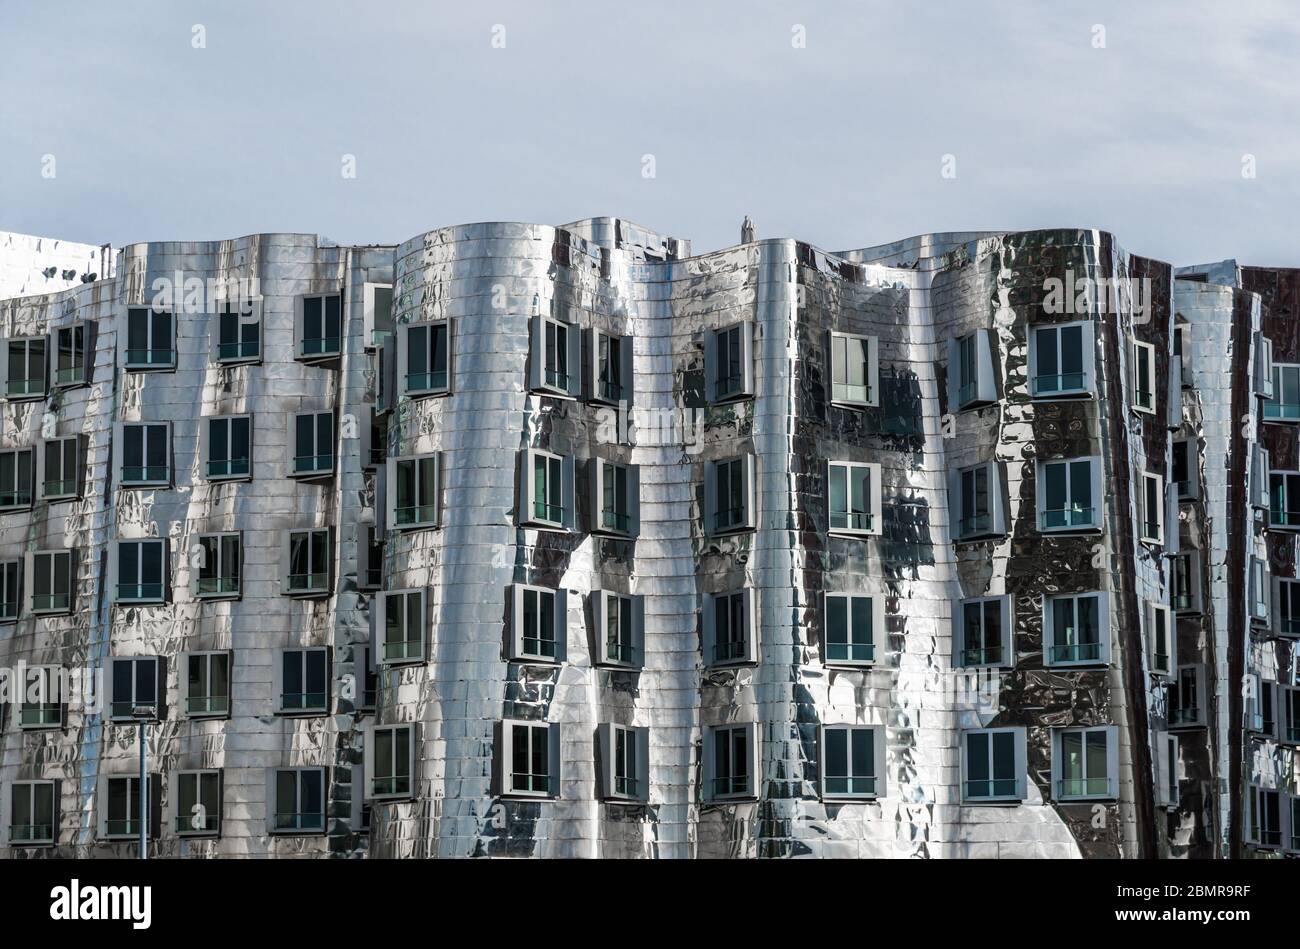 Dusseldorf, Germany - August 11, 2019: View at Gehry Neuer Zollhof buildings Stock Photo